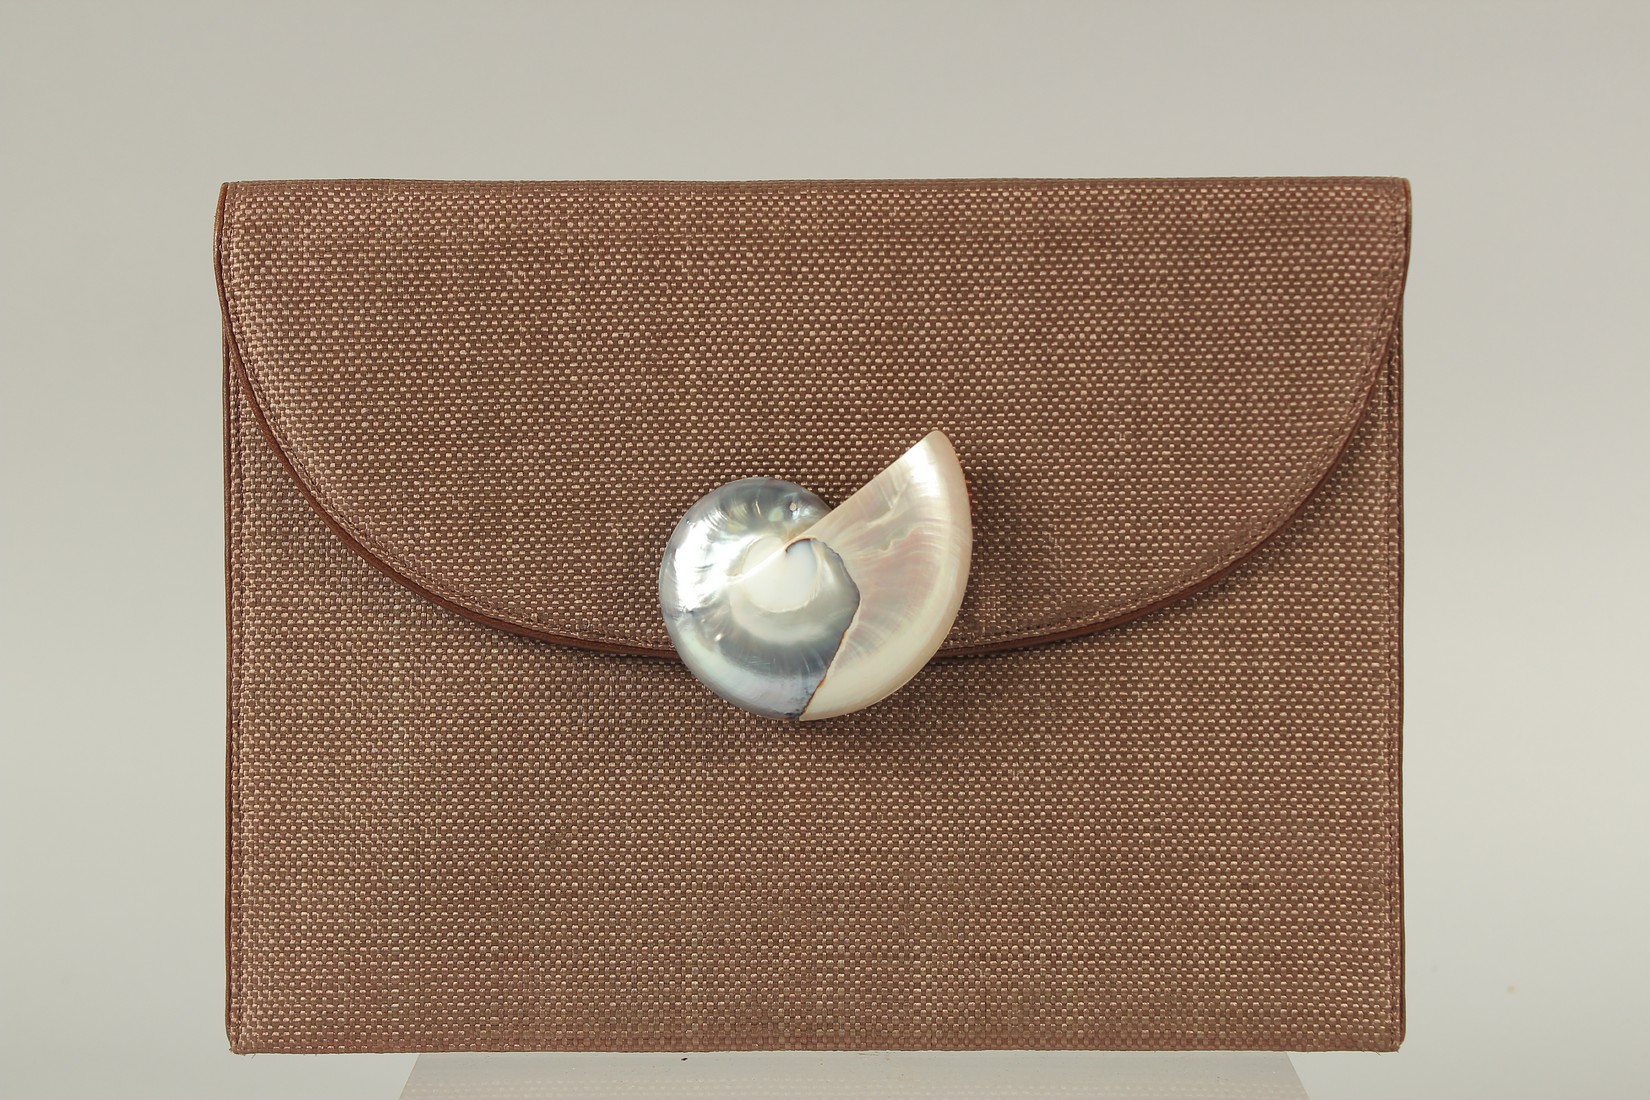 AN YVES SAINT LAURENT, PARIS, BROWN HESSIAN BAG with mother-of-pearl shell. 26cms long x 20cms